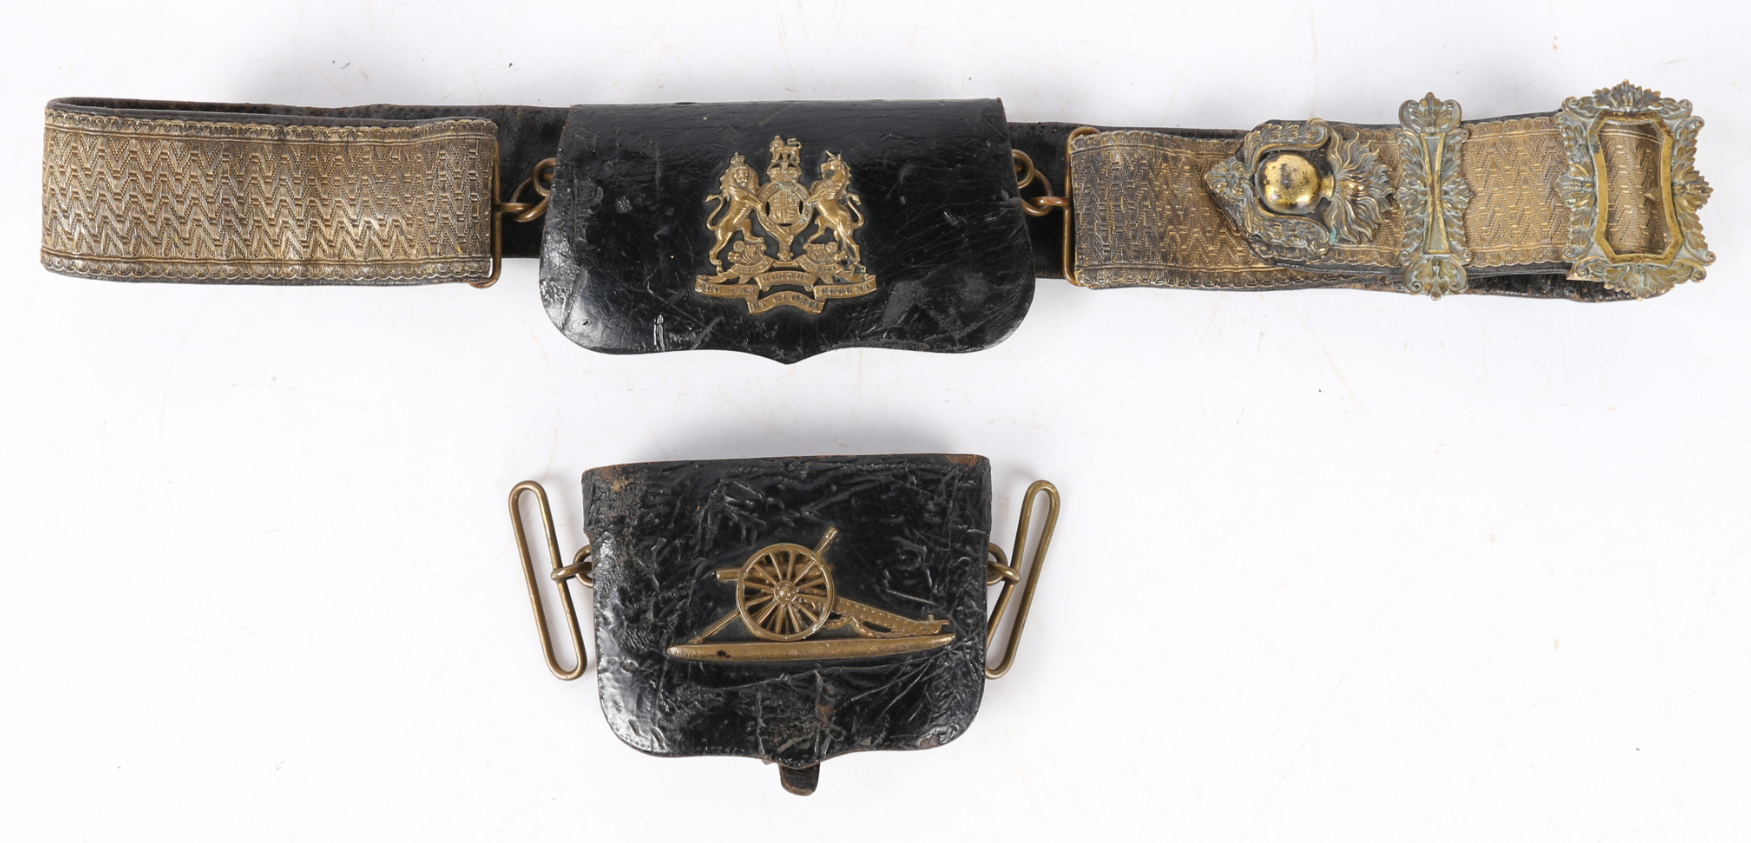 Post 1902 Royal Engineers Officers Full Dress Pouch, black patent leather with badge of crowned